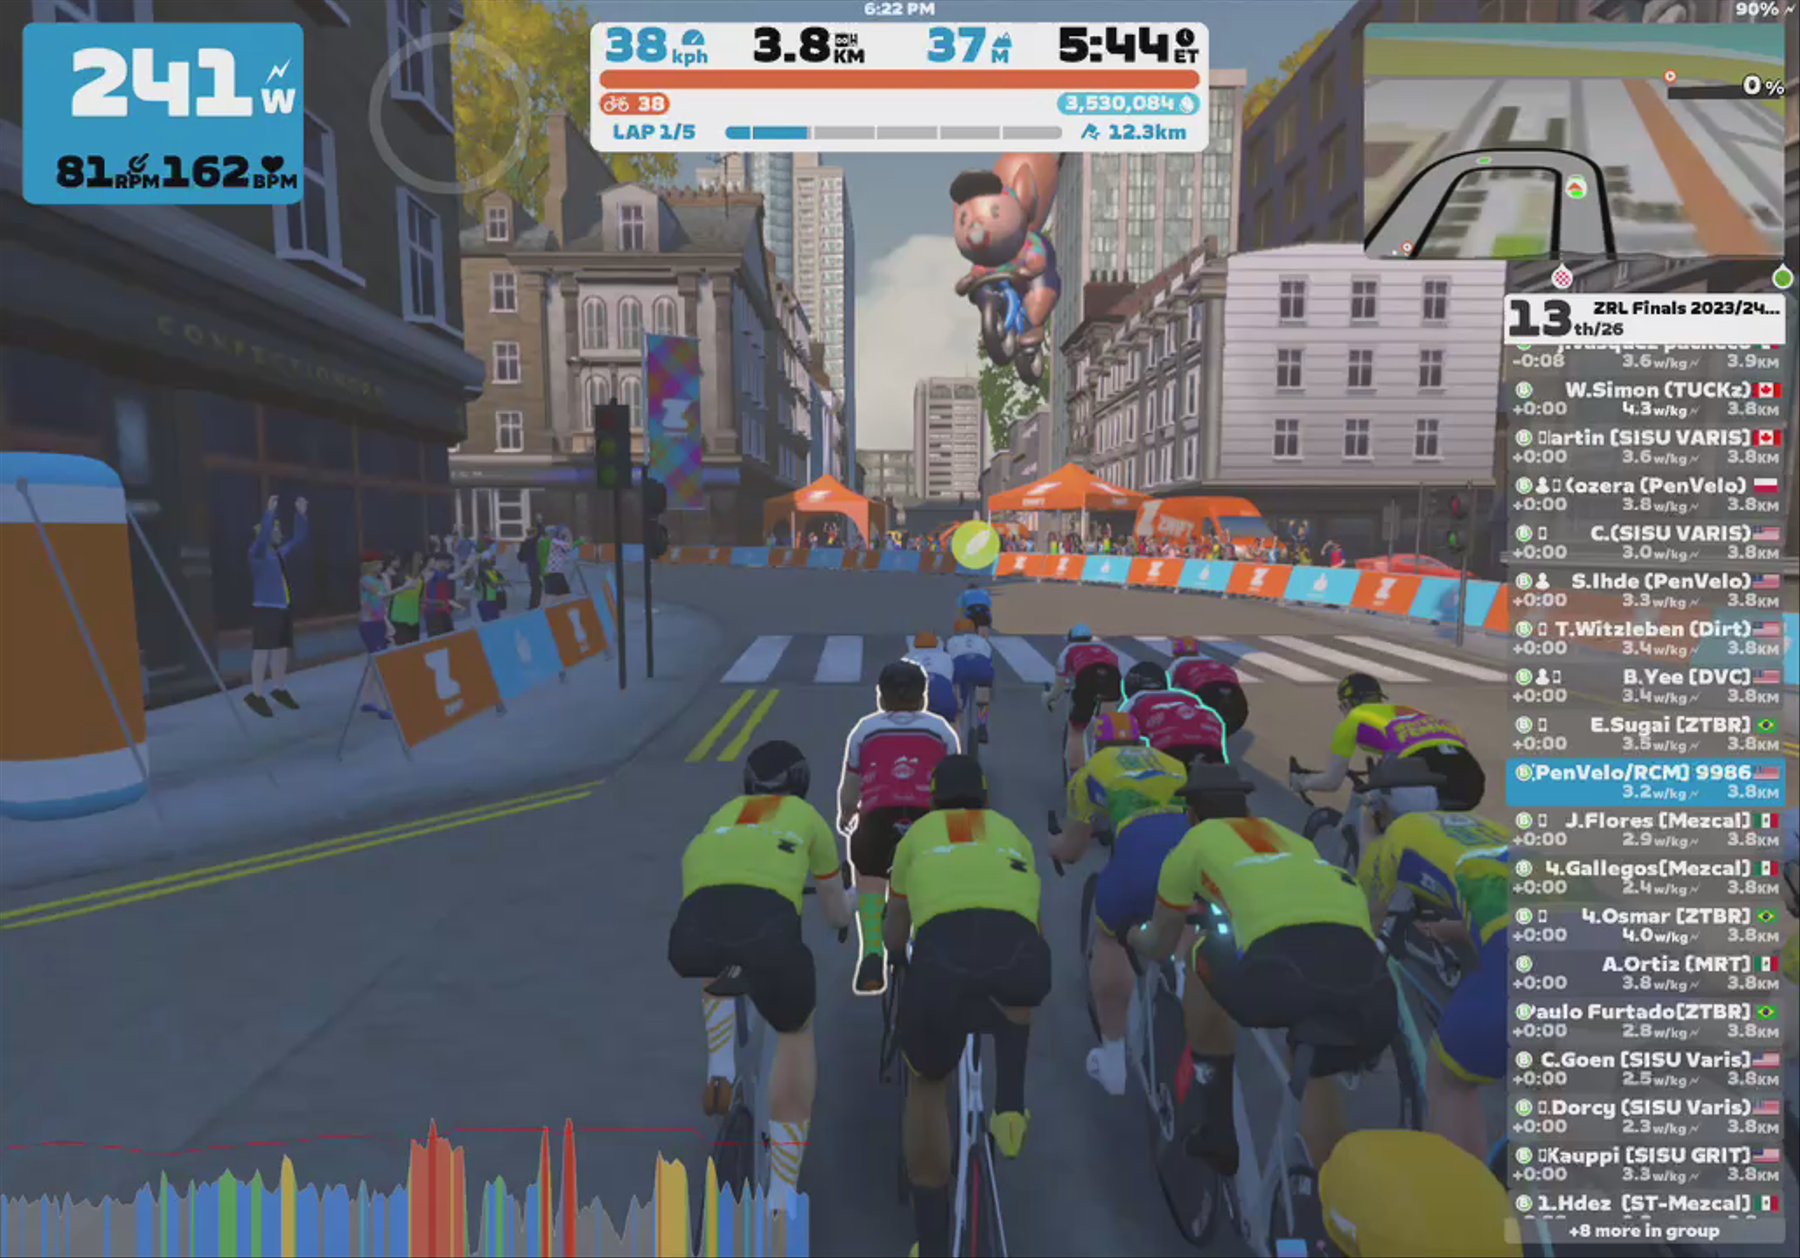 Zwift - Race: ZRL Finals 2023/24 - Open AMERICA Division 1 - Bowl Final (Part2) (B) on Glasgow Reverse in Scotland